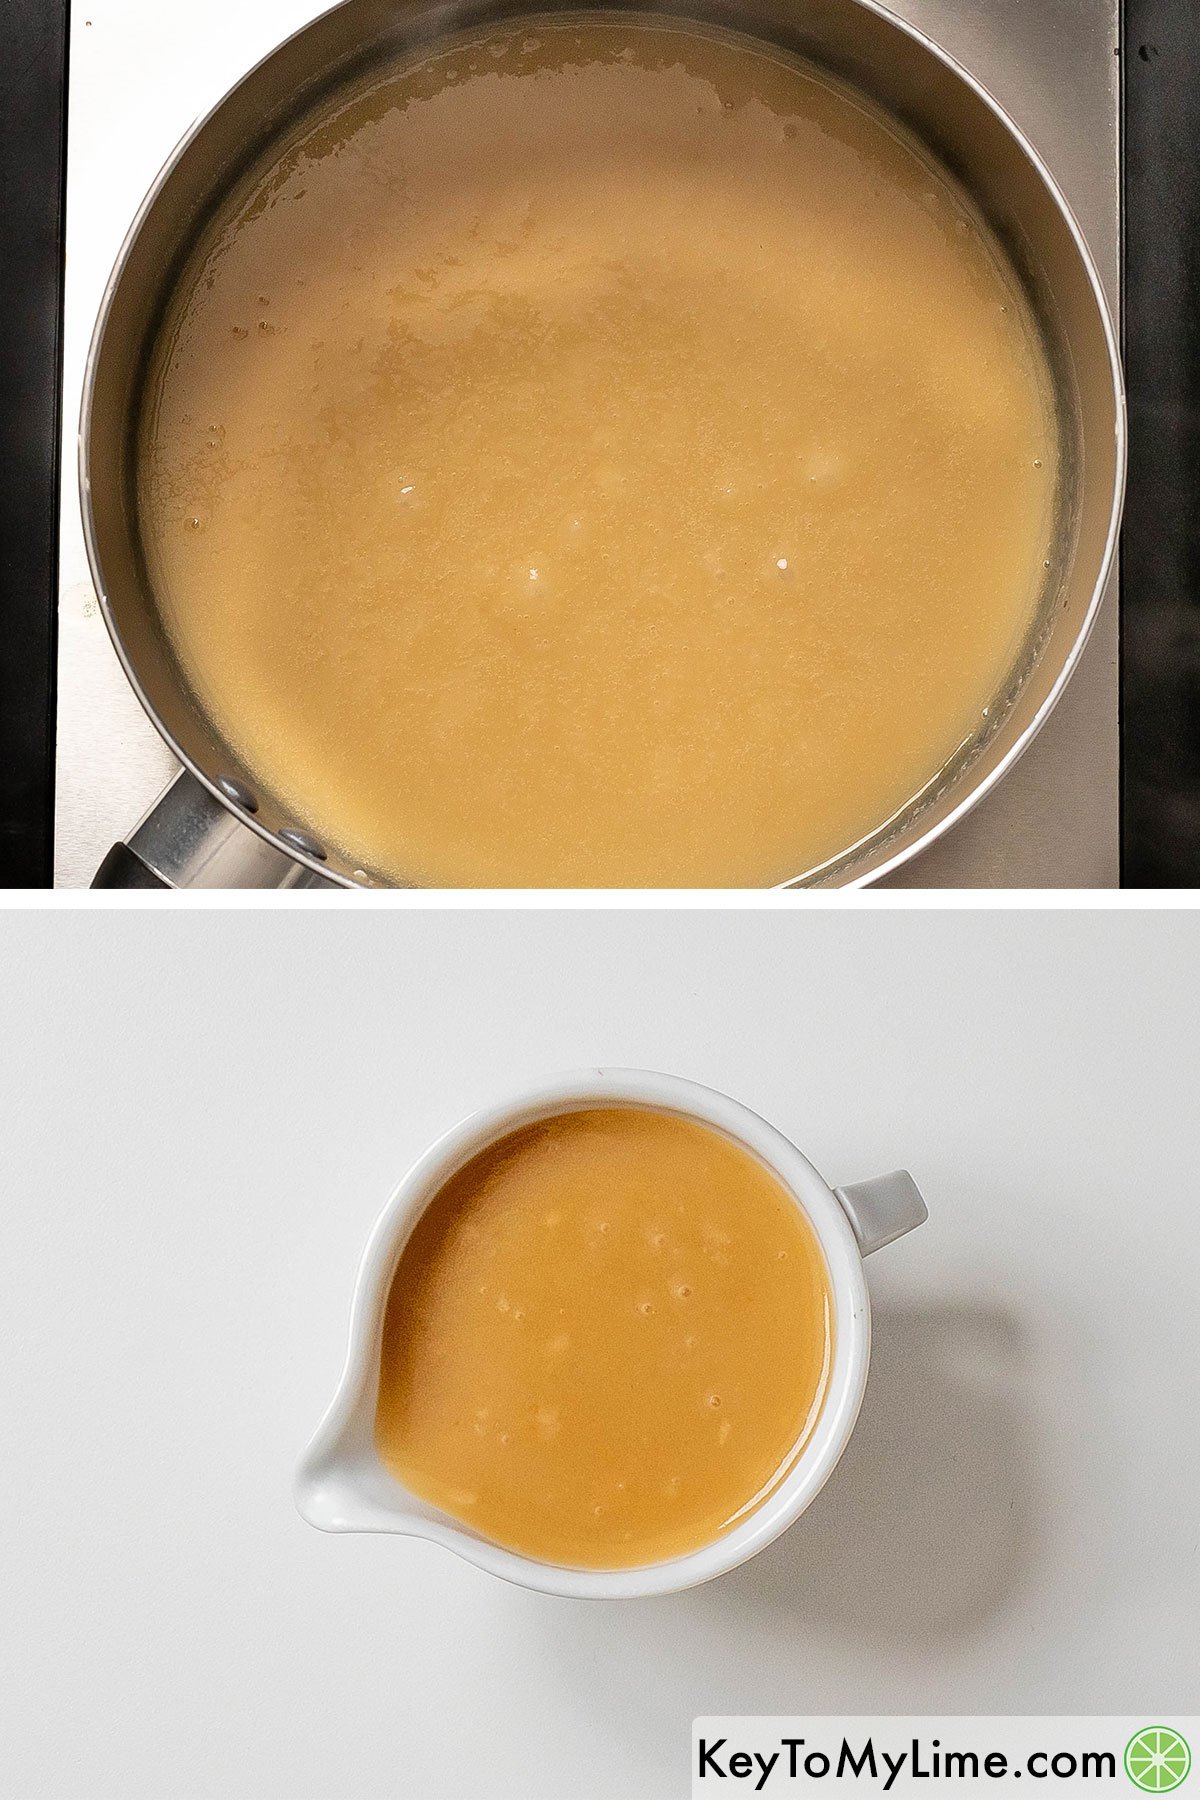 Once the gravy has thickened transfer the gravy to a pitcher.